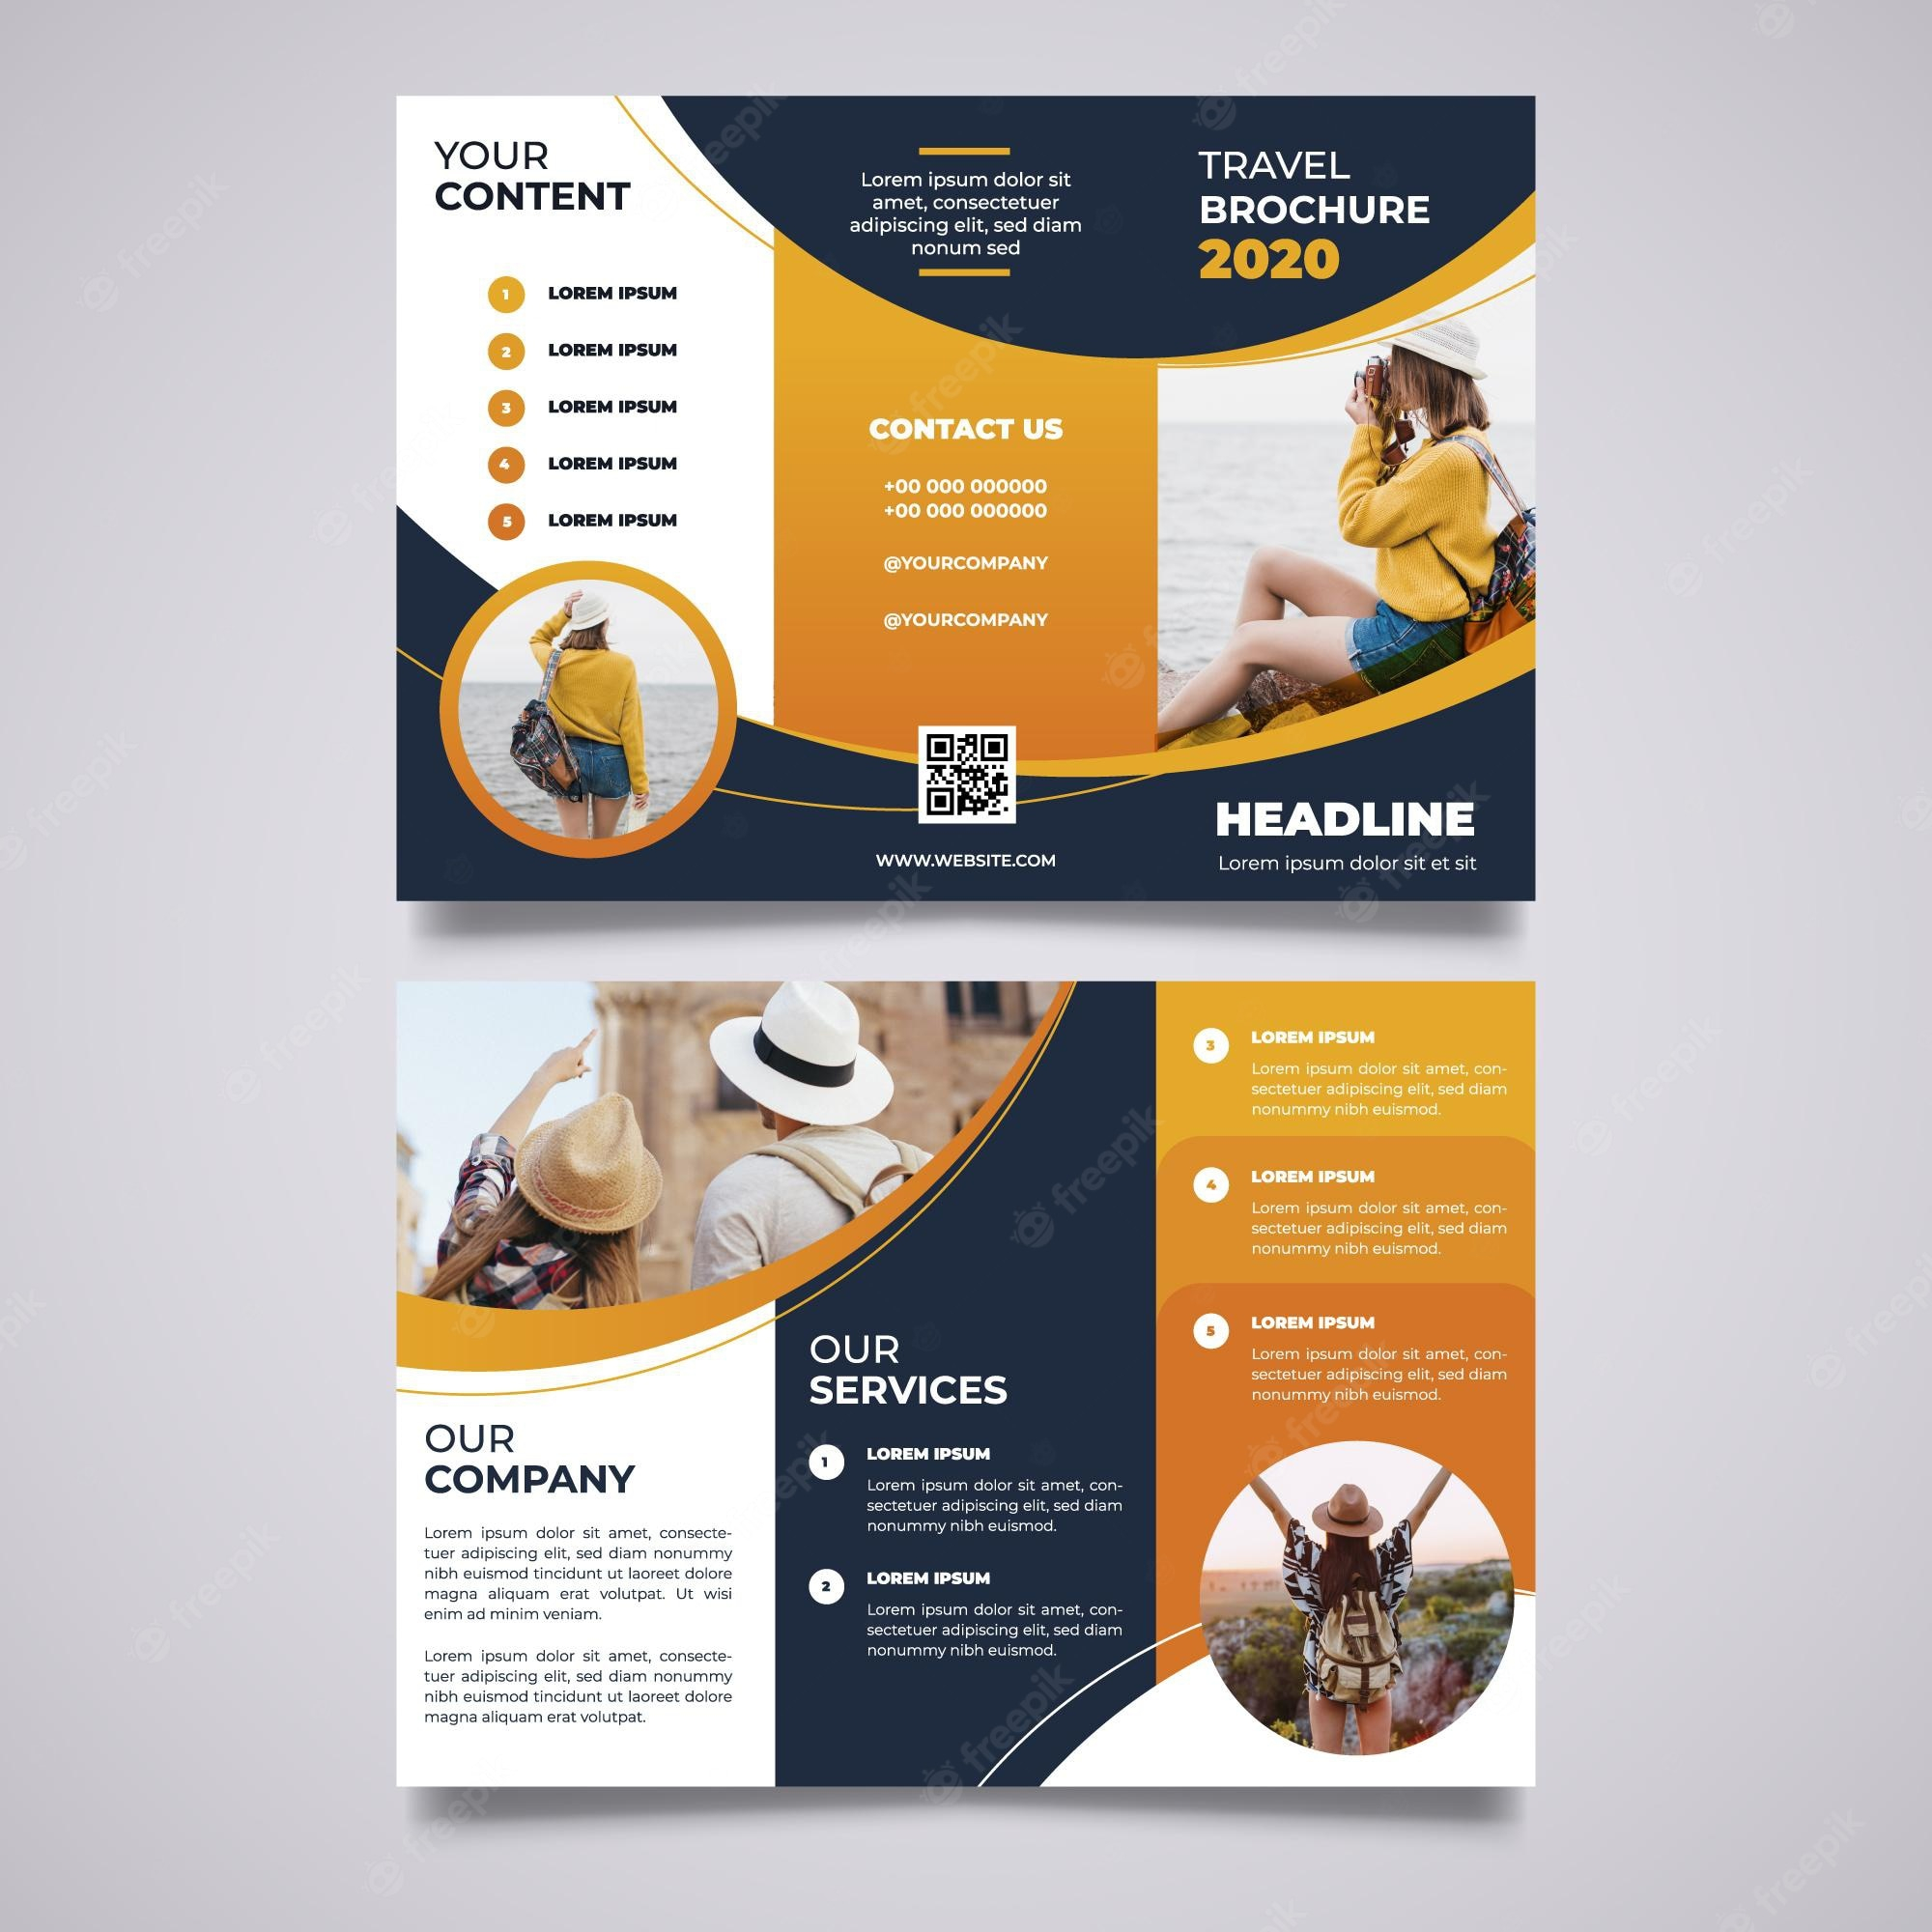 Brochure template - Free Vectors & PSD Download Intended For One Page Brochure Template